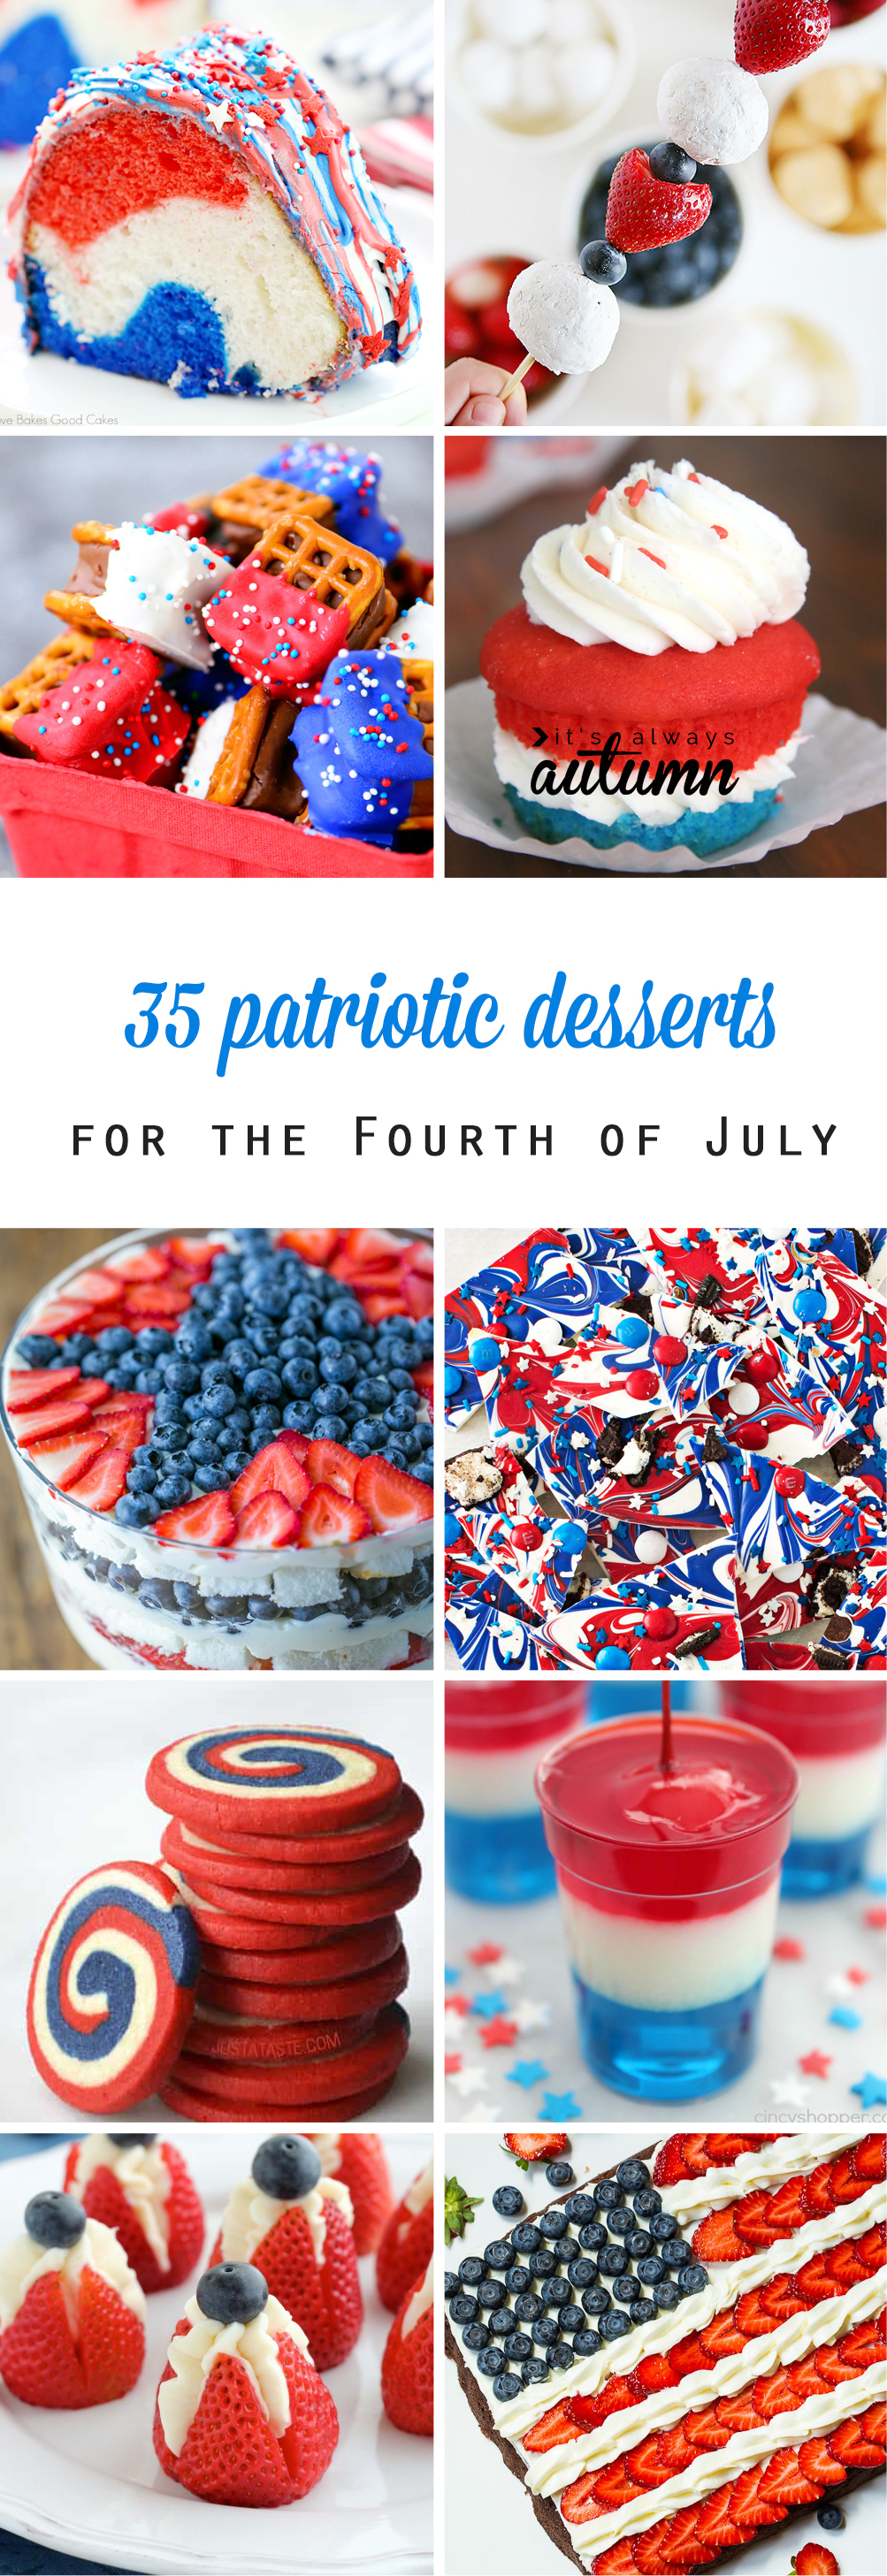 Collage of patriotic desserts for the Fourth of July